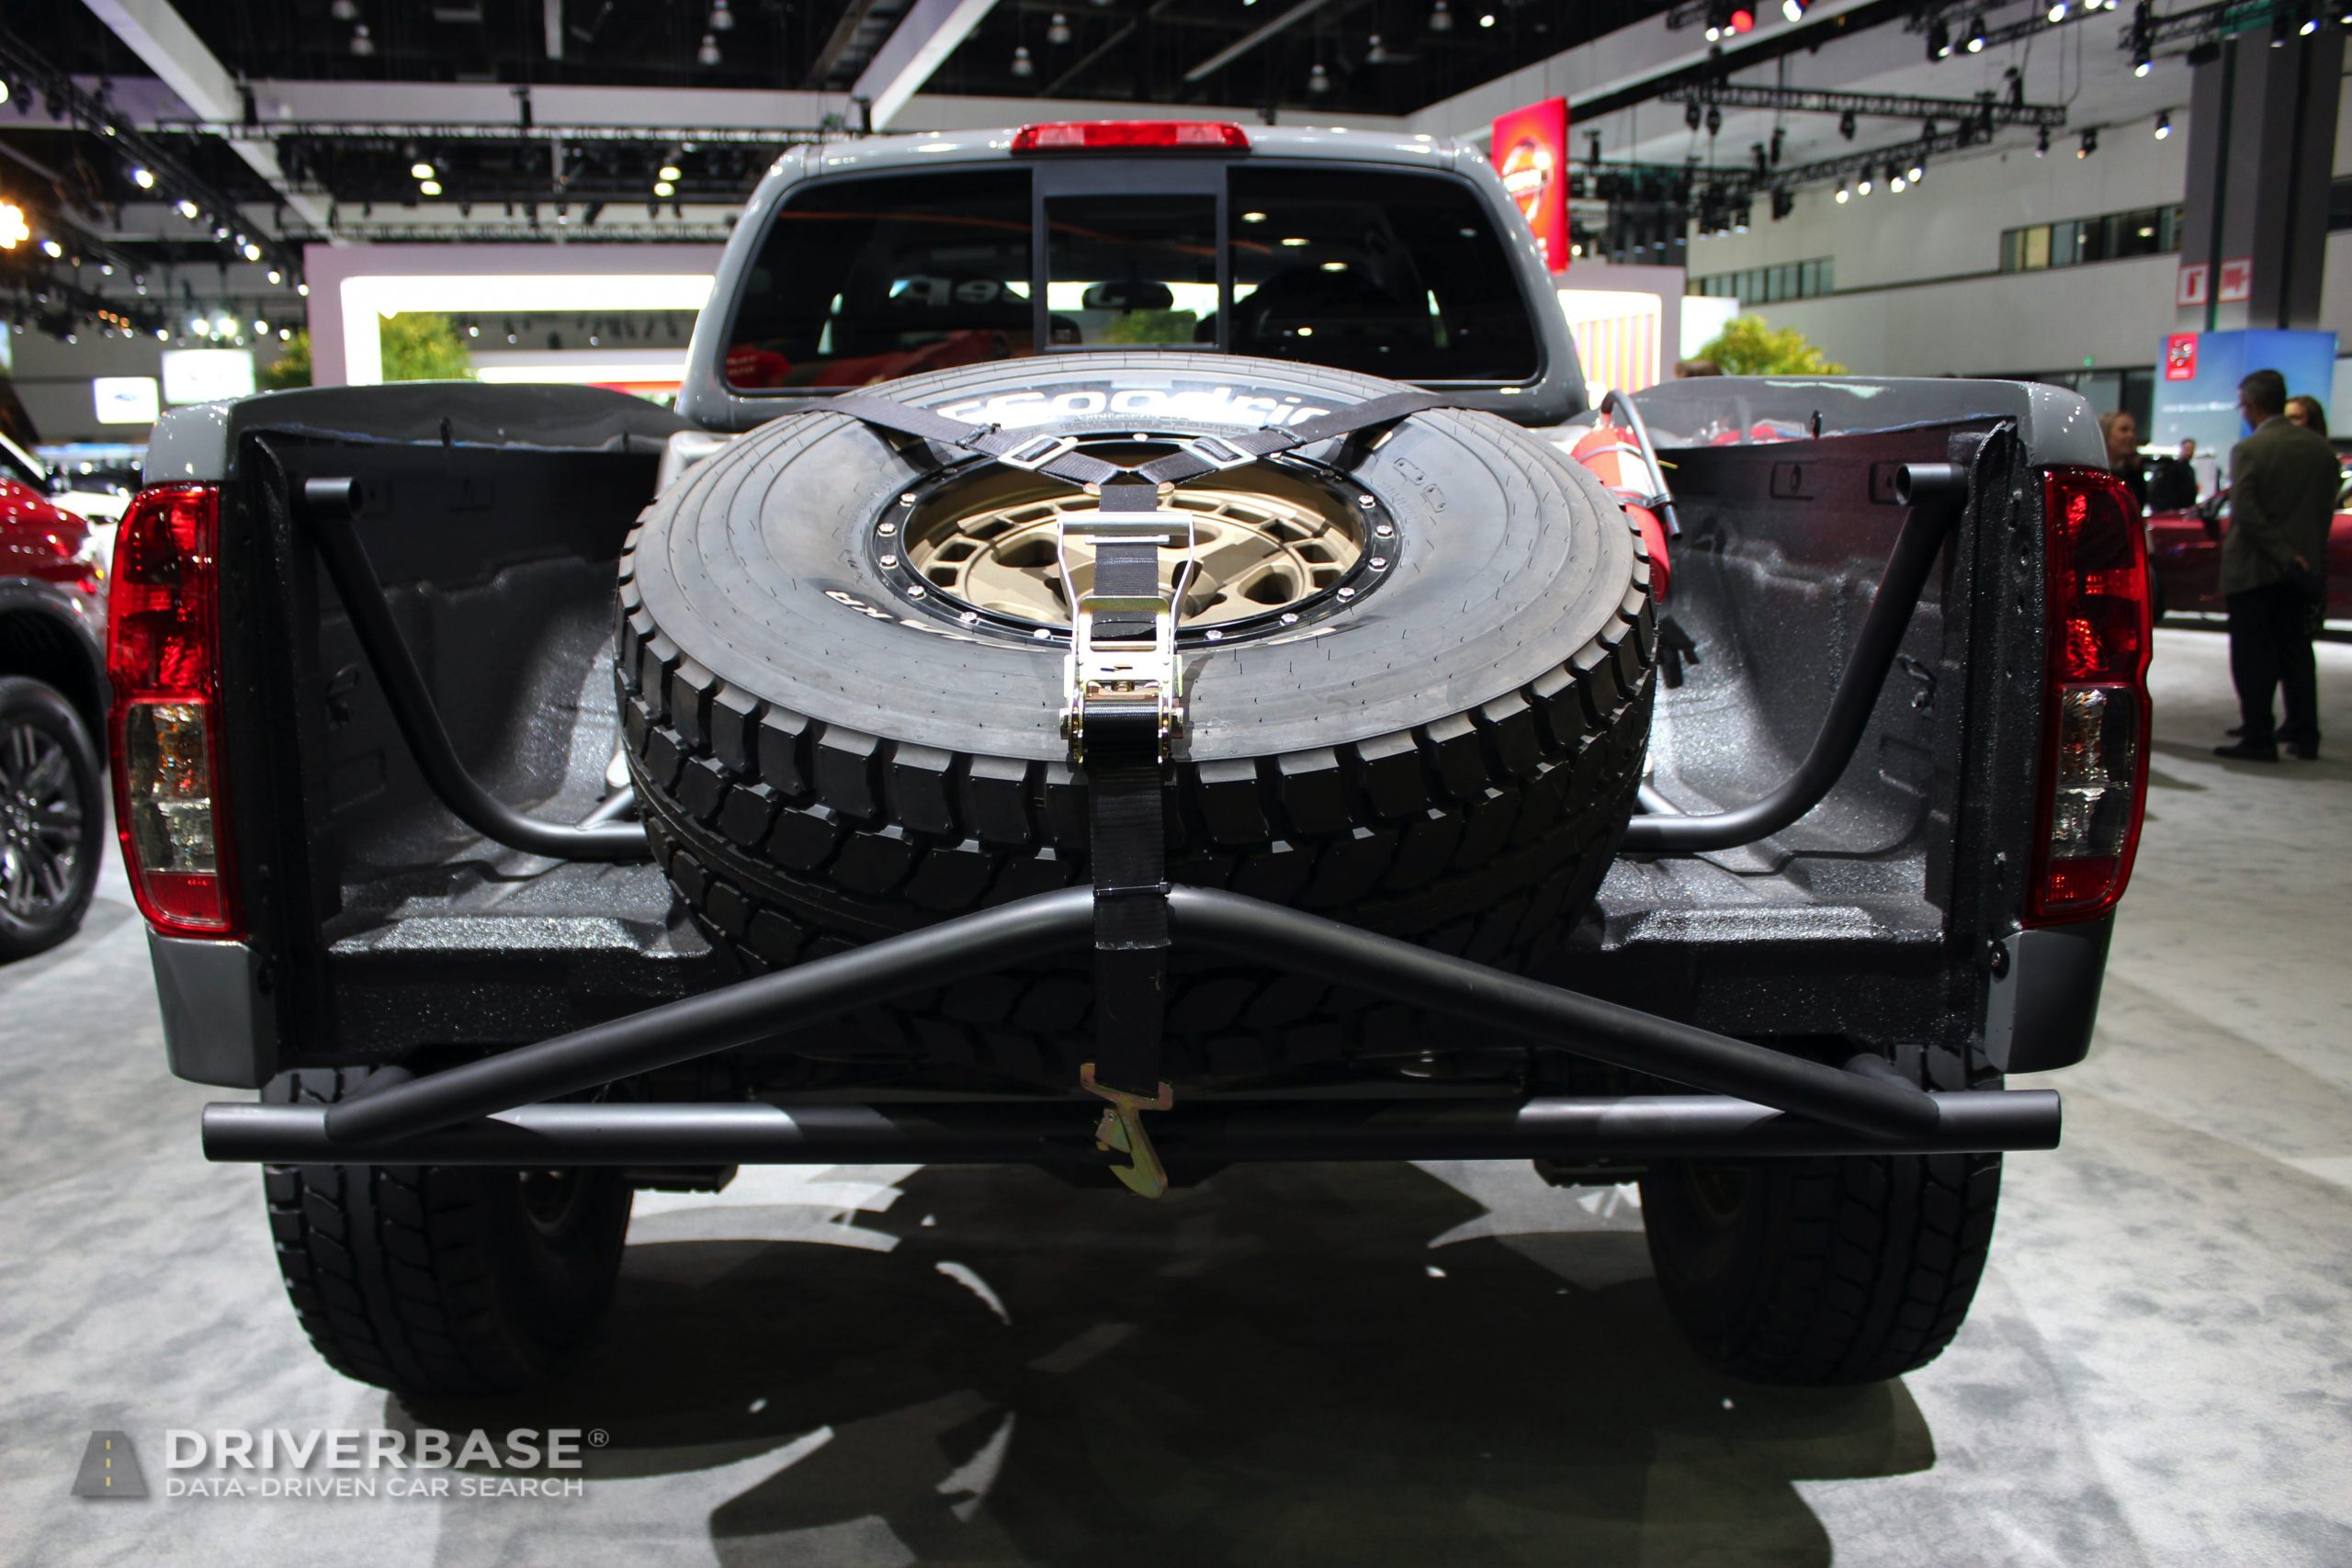 Nissan Titan Rally Truck at the 2019 Los Angeles Auto Show